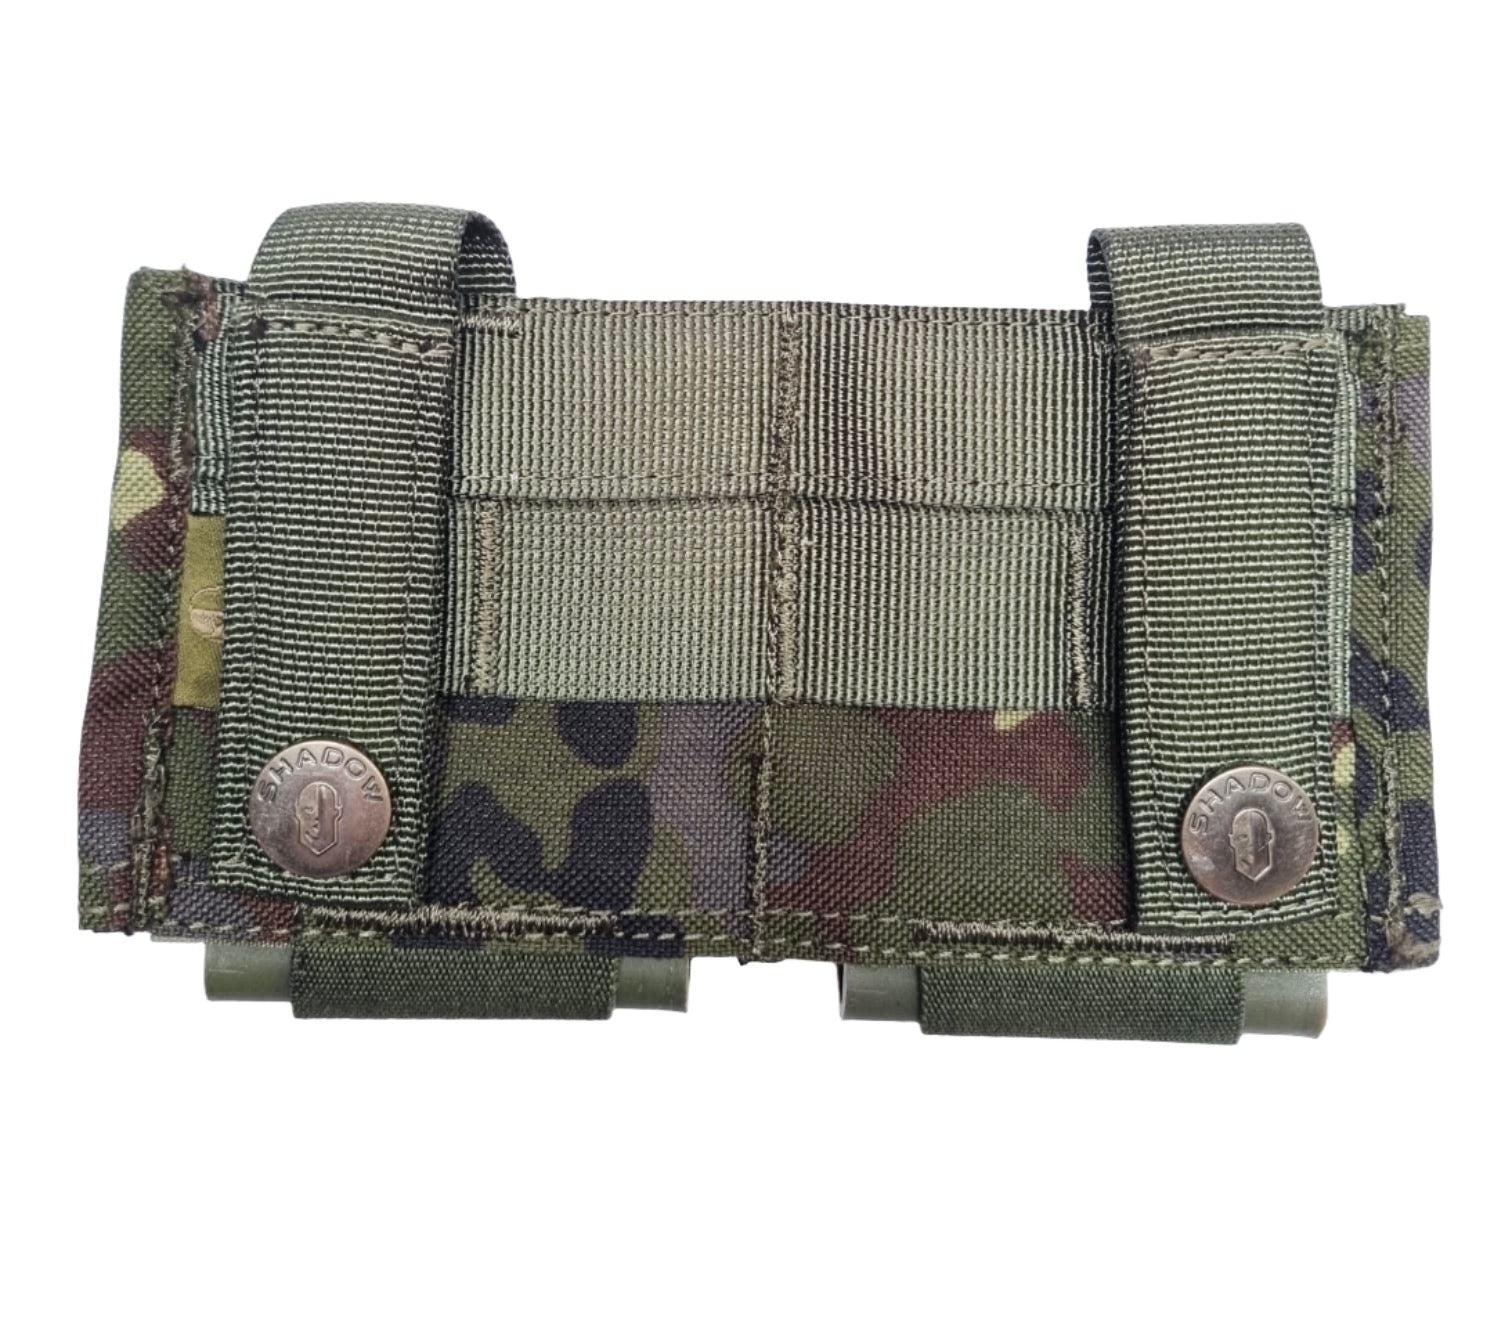 SHE-23032 GRIPTAC DOUBLE M4/M16 MAG POUCH GERMAN FLECTARN